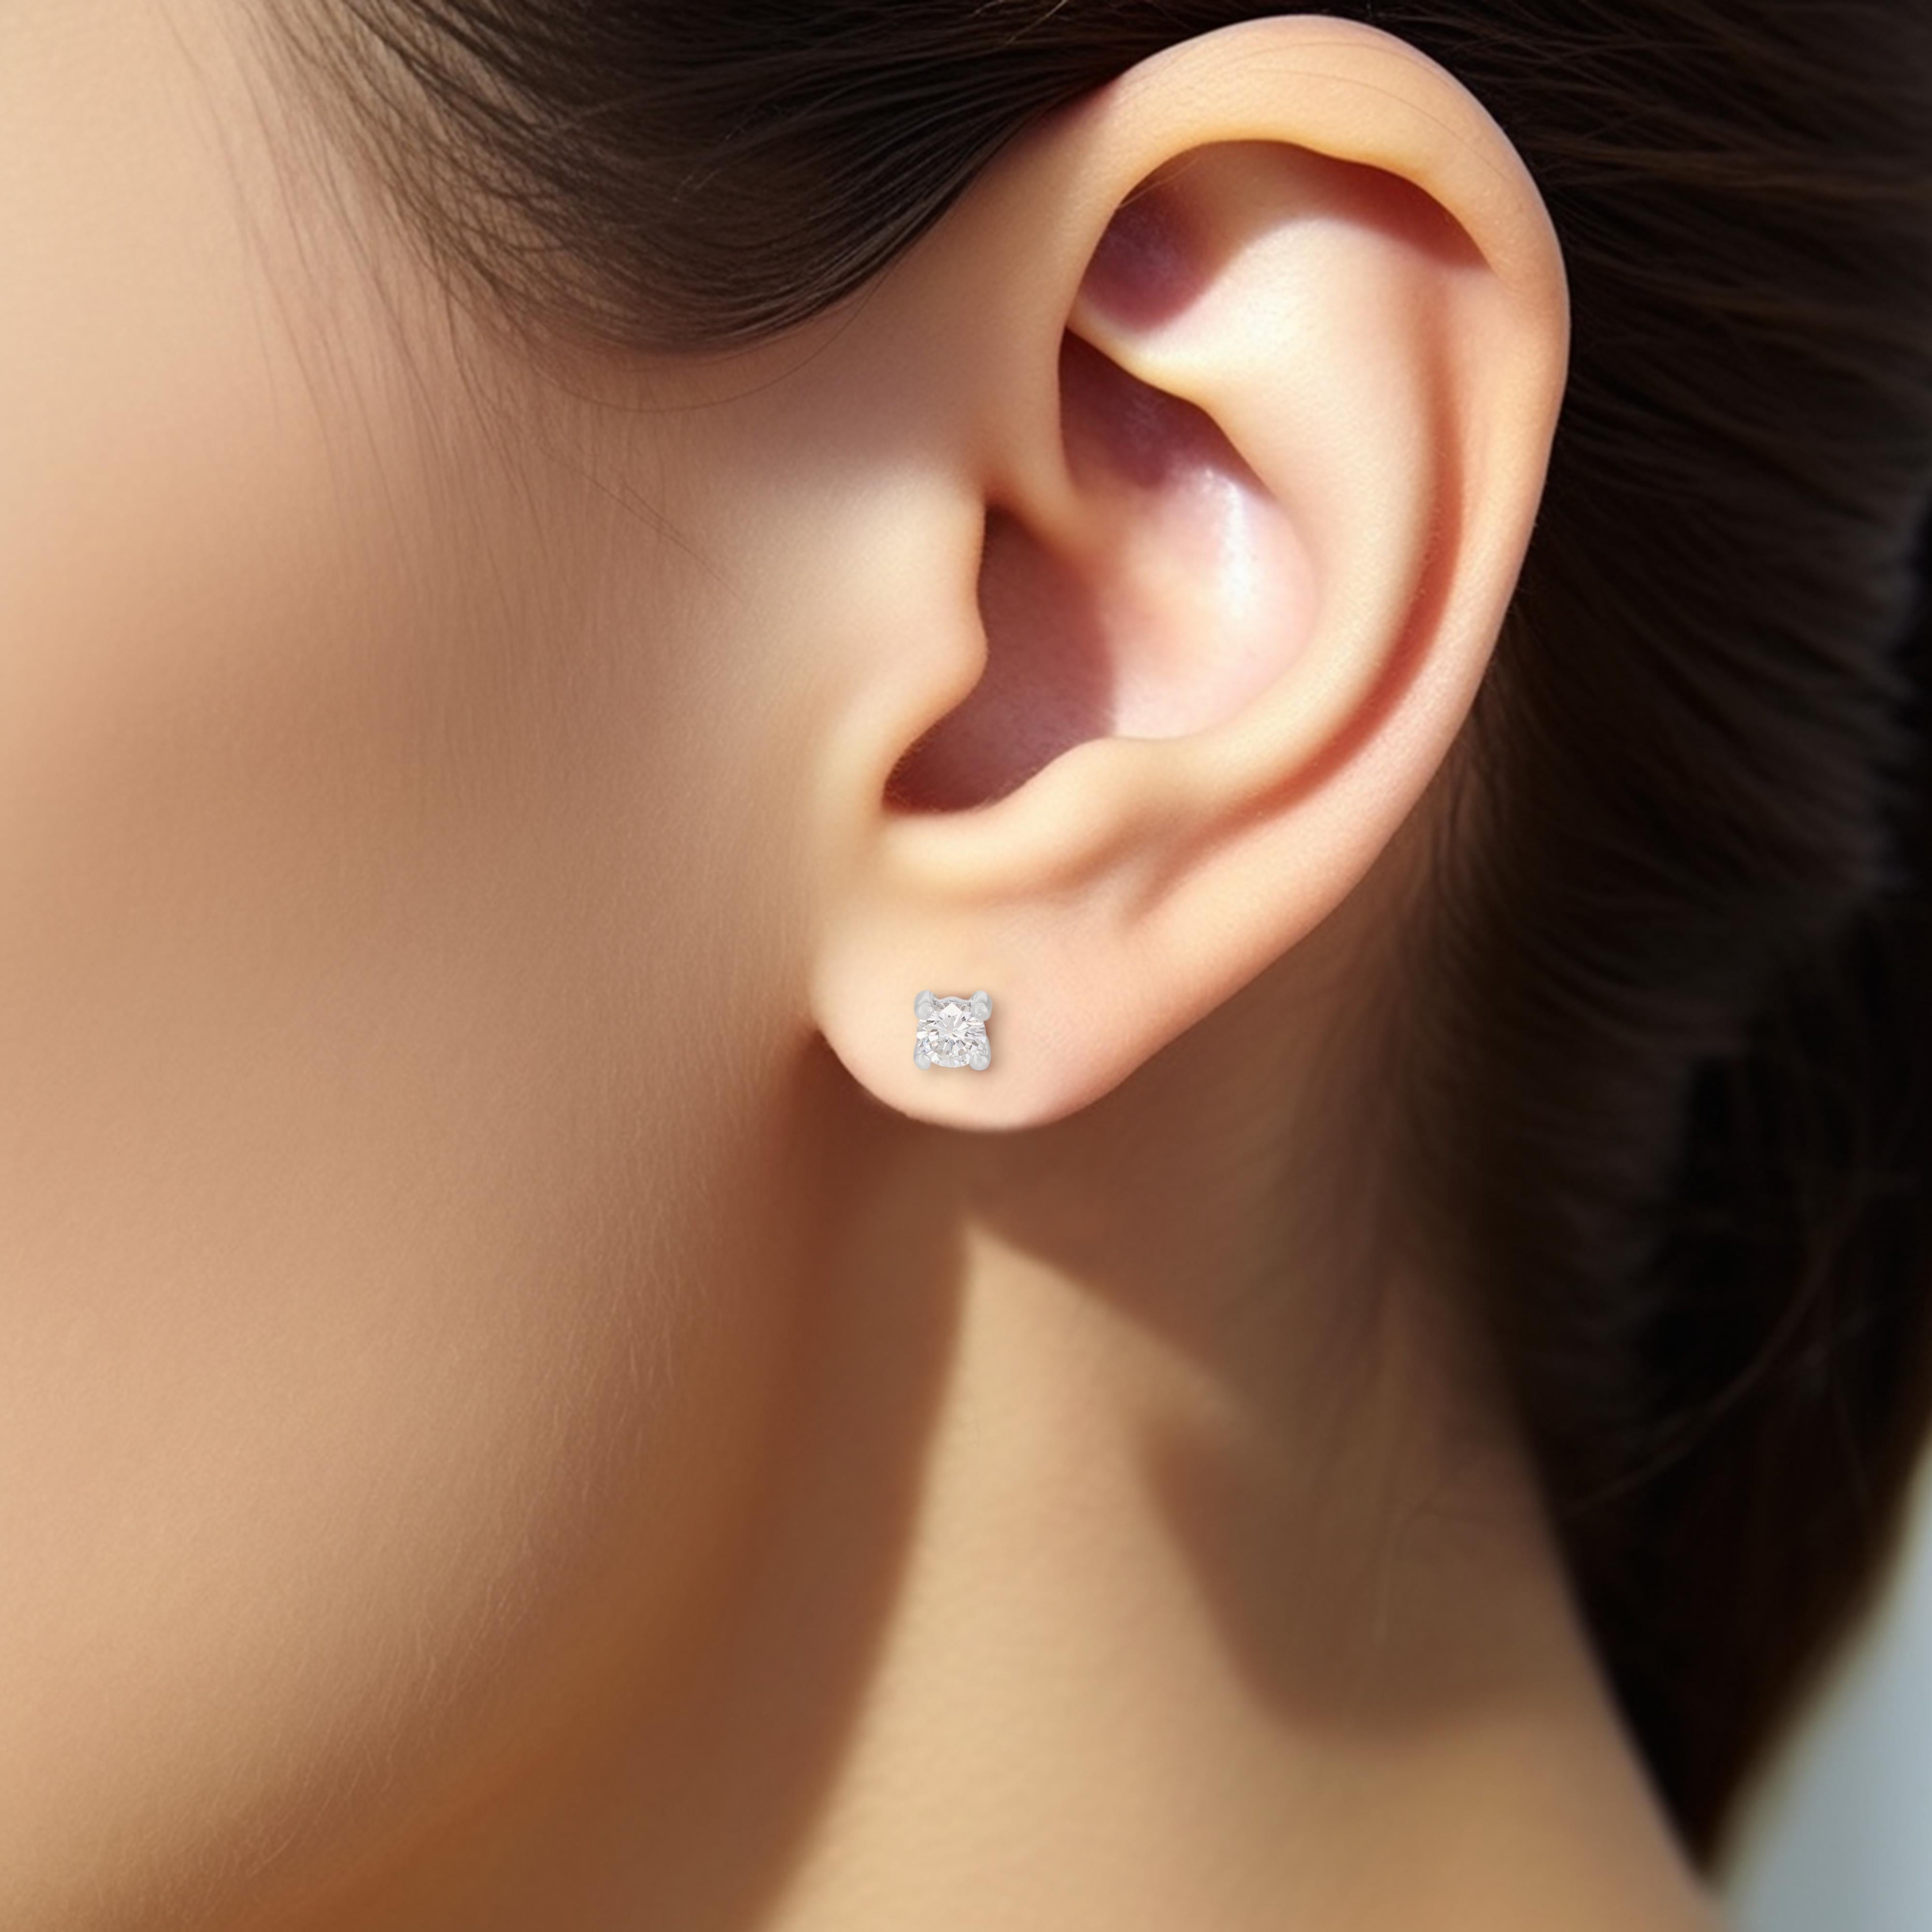 These elegant stud earrings feature two round brilliant natural diamonds, each with a carat weight of 0.12ct, showcasing a beautiful G color grade and VS clarity. The diamonds are securely set in a classic four-prong setting, allowing their natural